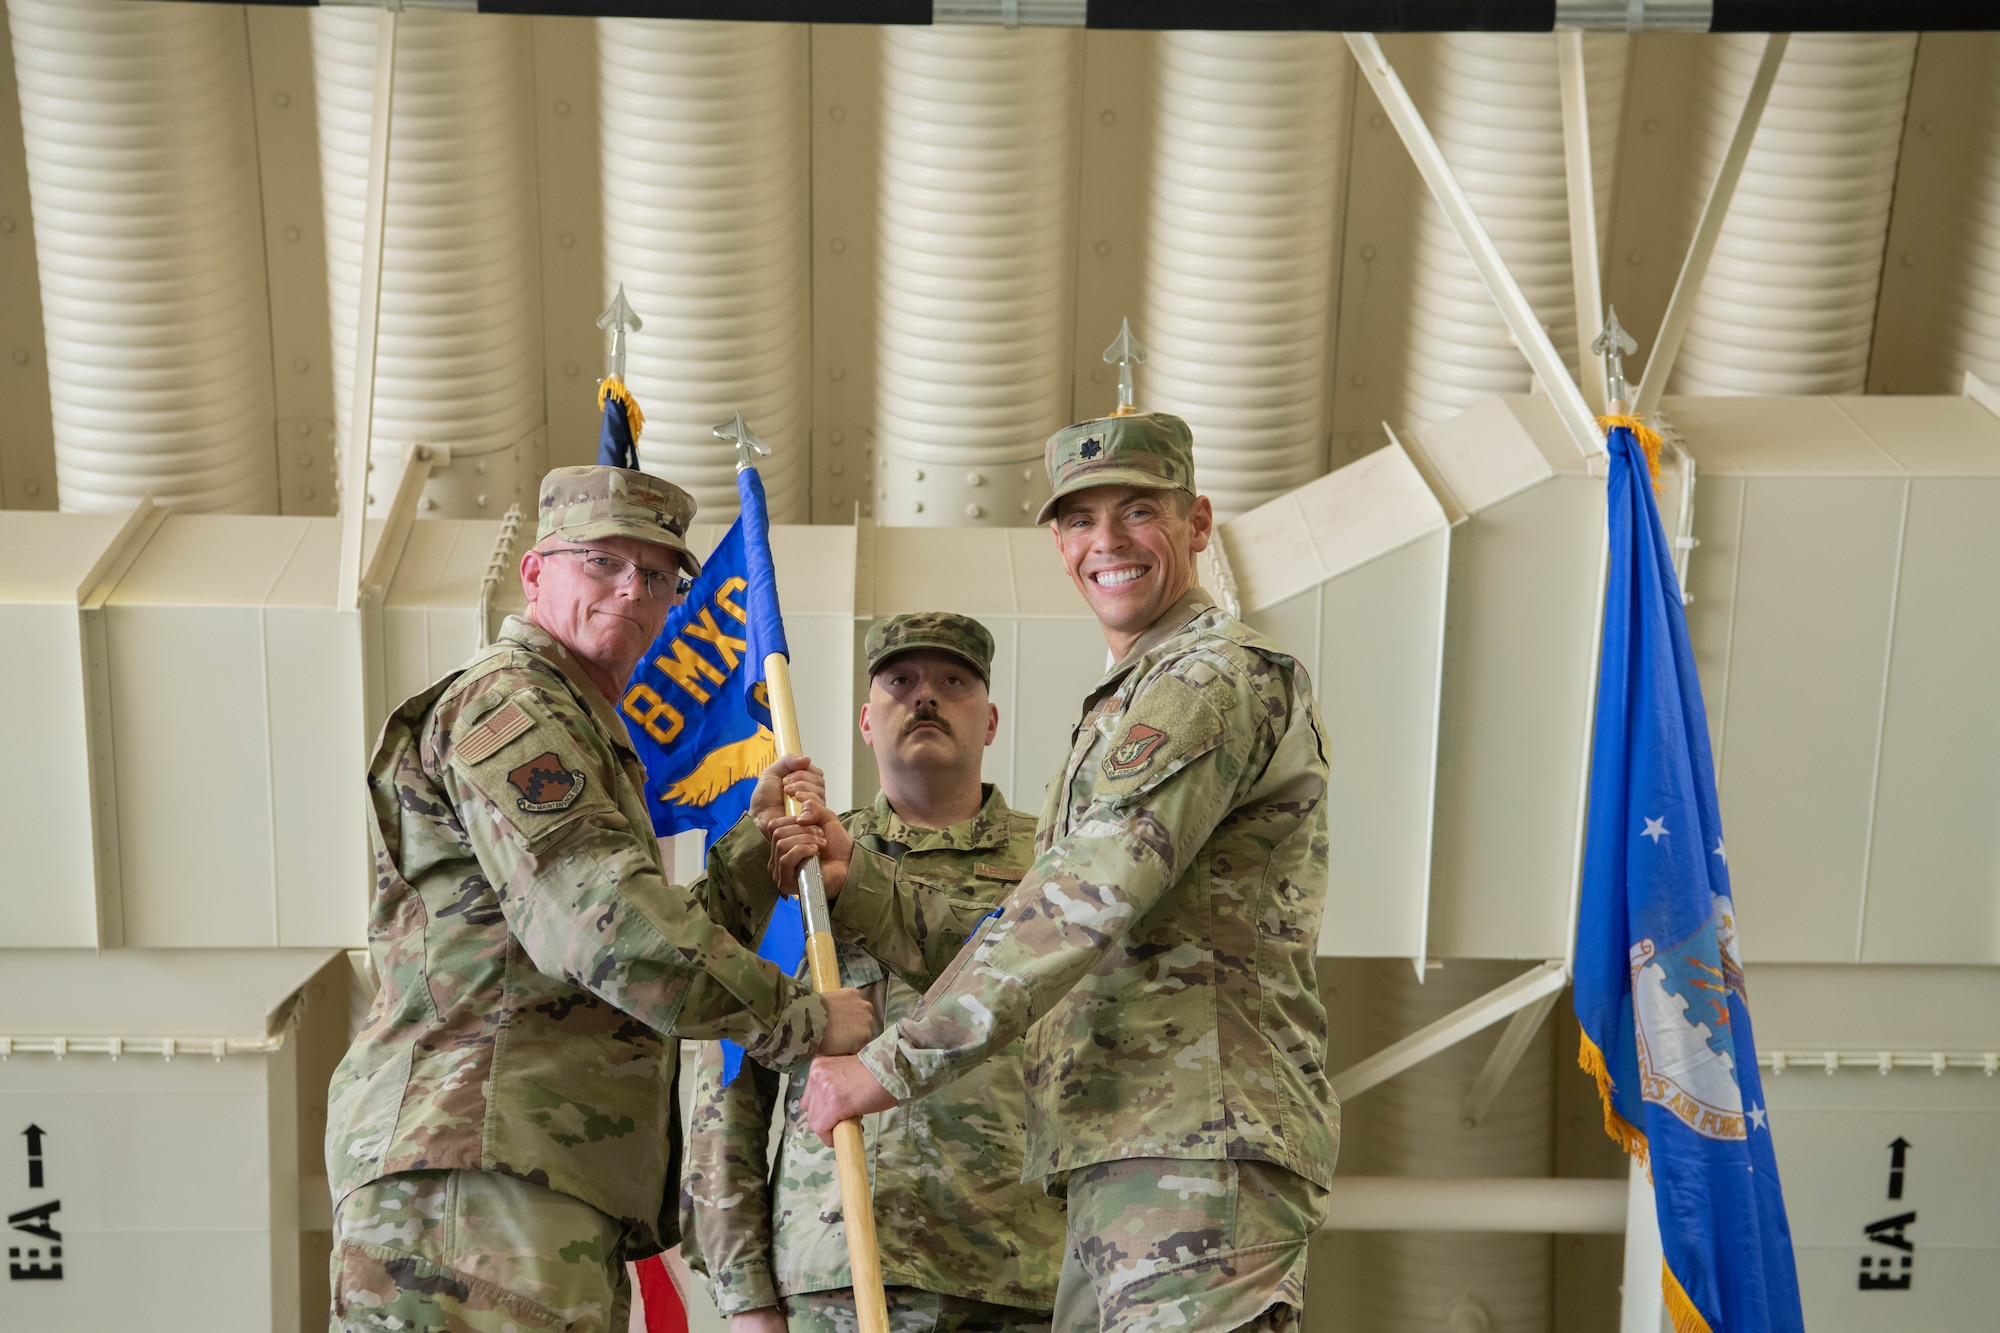 Military members conduct a ceremony with a guidon flag.